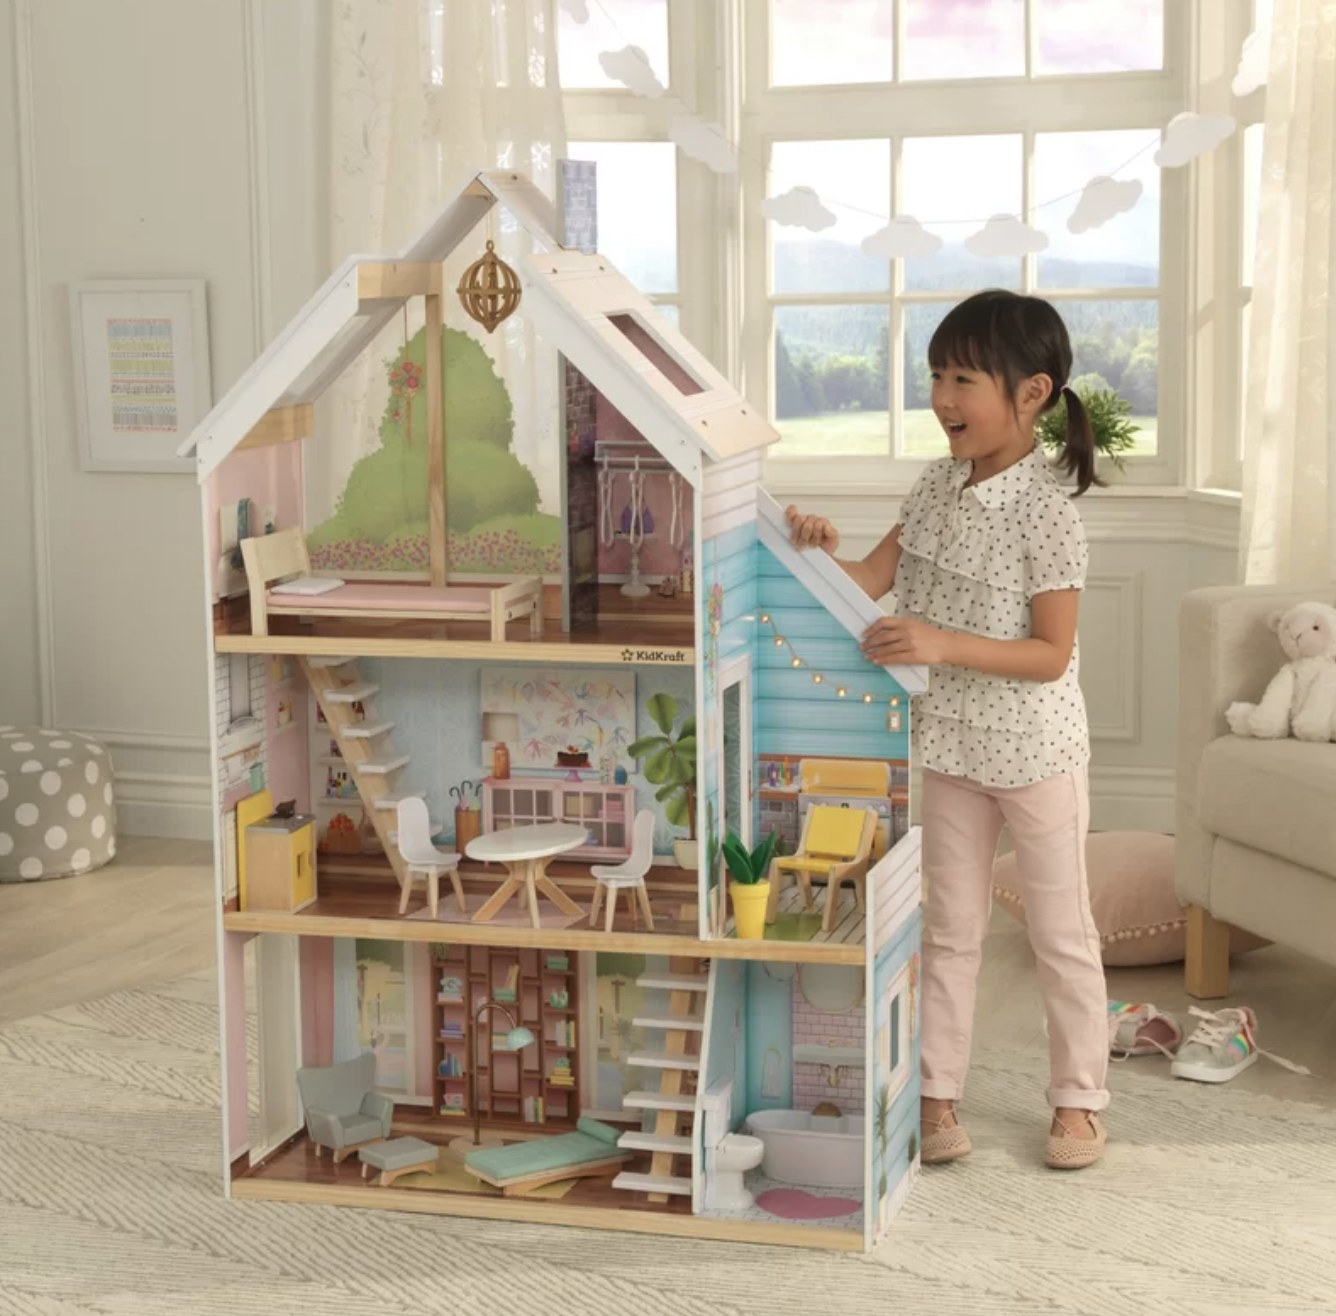 Kid with doll house